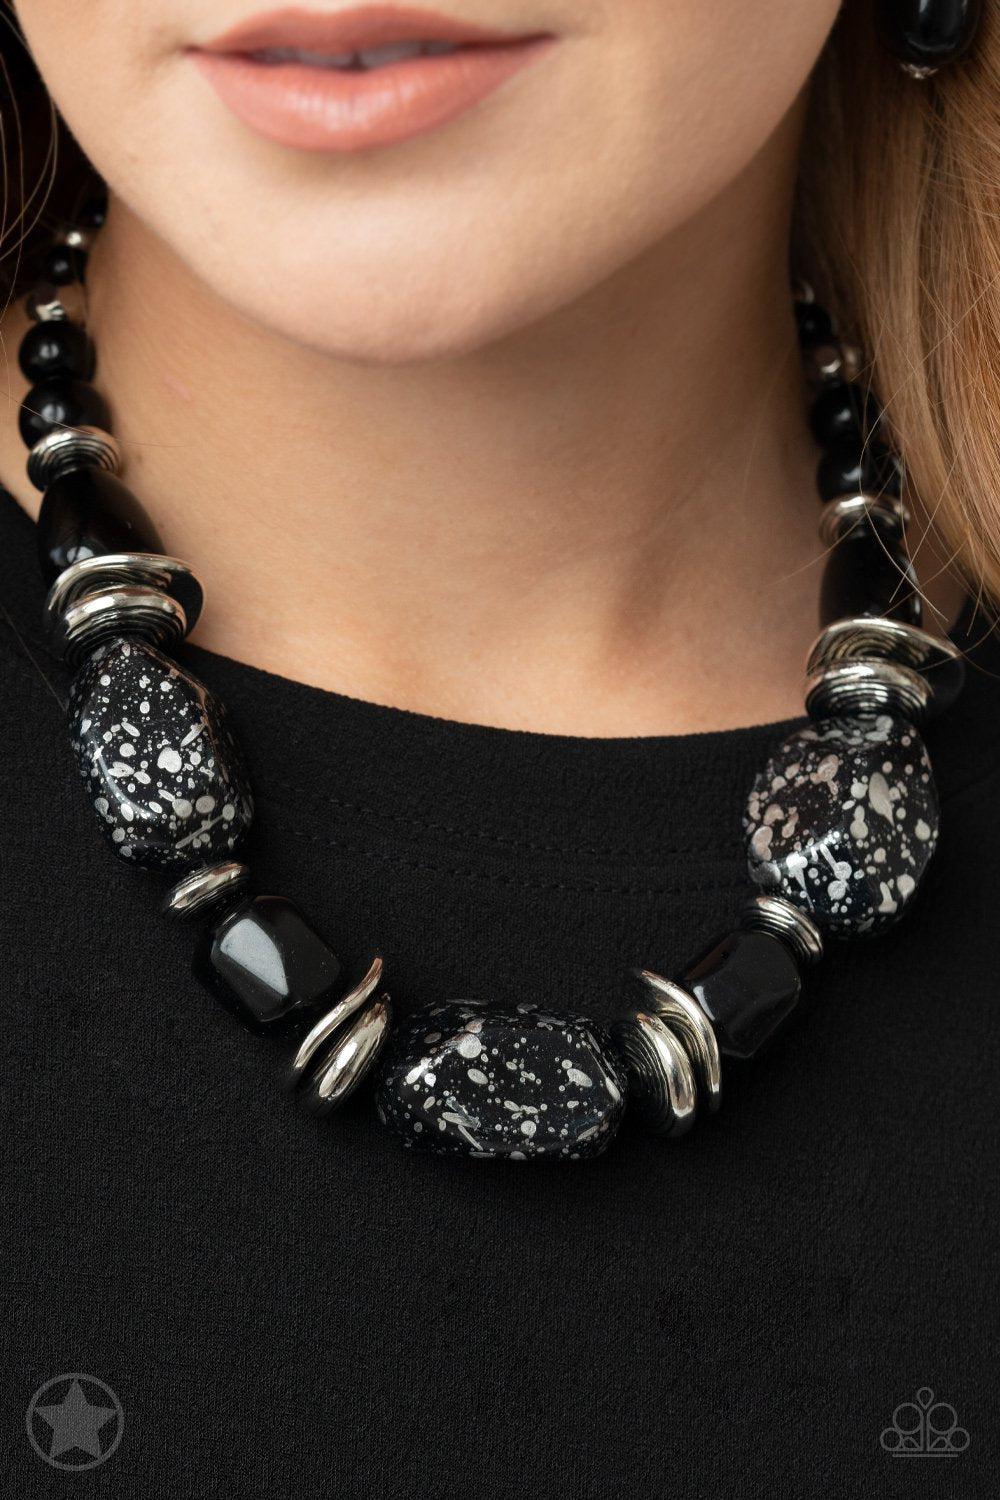 In Good Glazes Chunky Black Necklace and matching Earrings - Paparazzi Accessories - model -CarasShop.com - $5 Jewelry by Cara Jewels